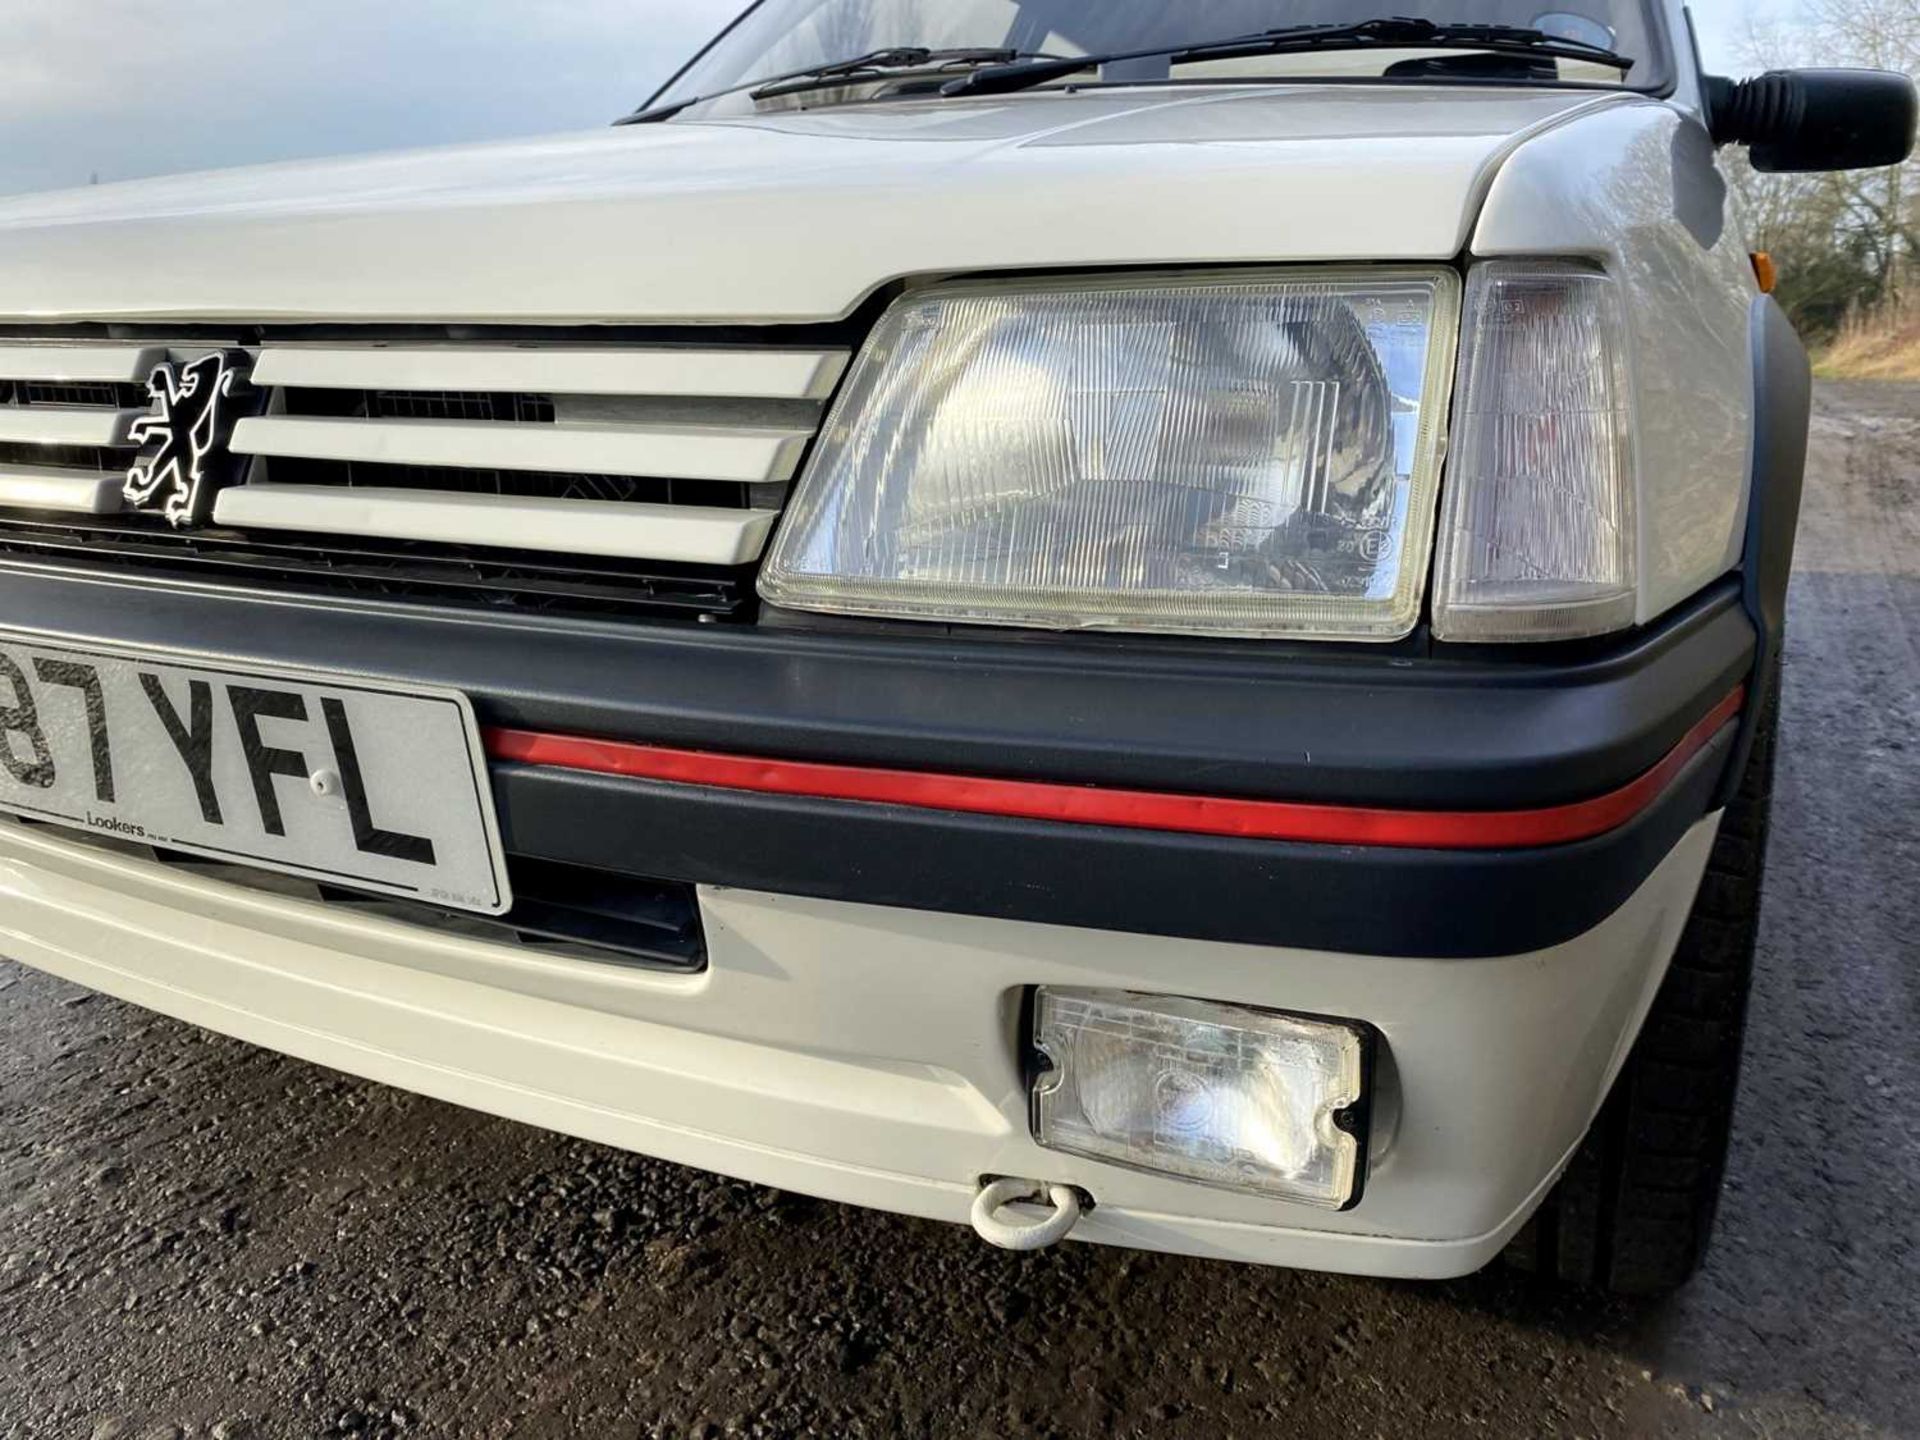 1990 Peugeot 205 GTi 1.6 Only 56,000 miles, same owner for 16 years - Image 52 of 81